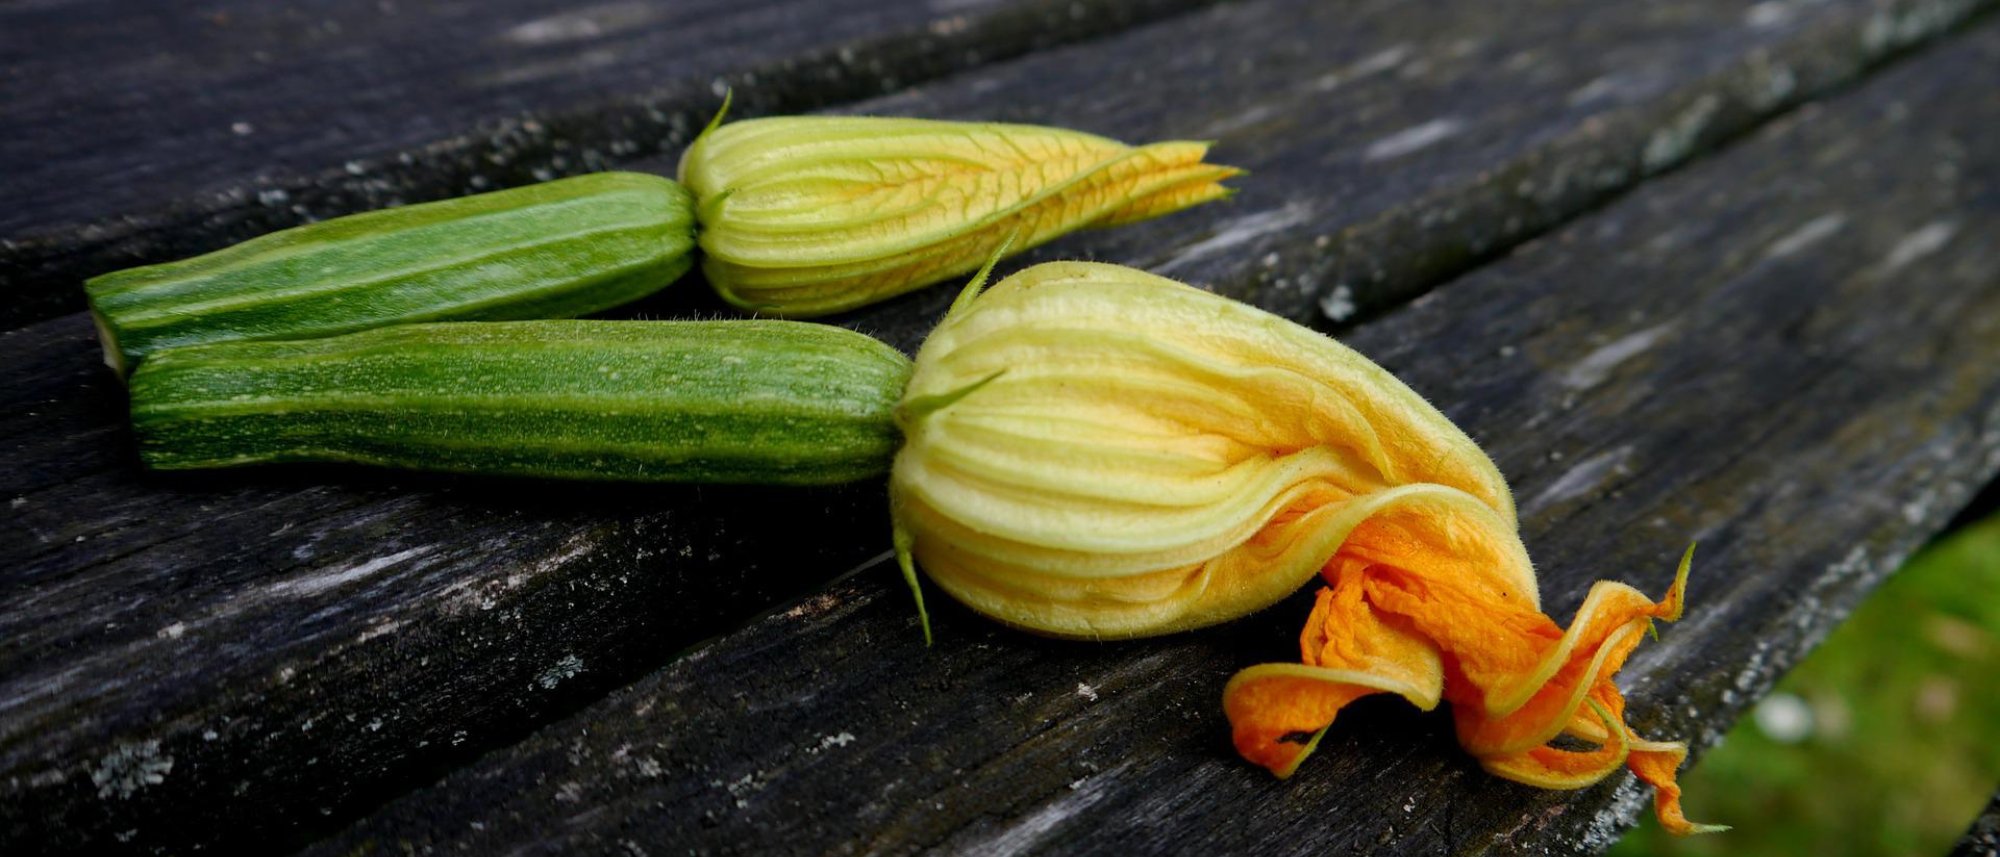 Grow your own zucchini squash in your garden